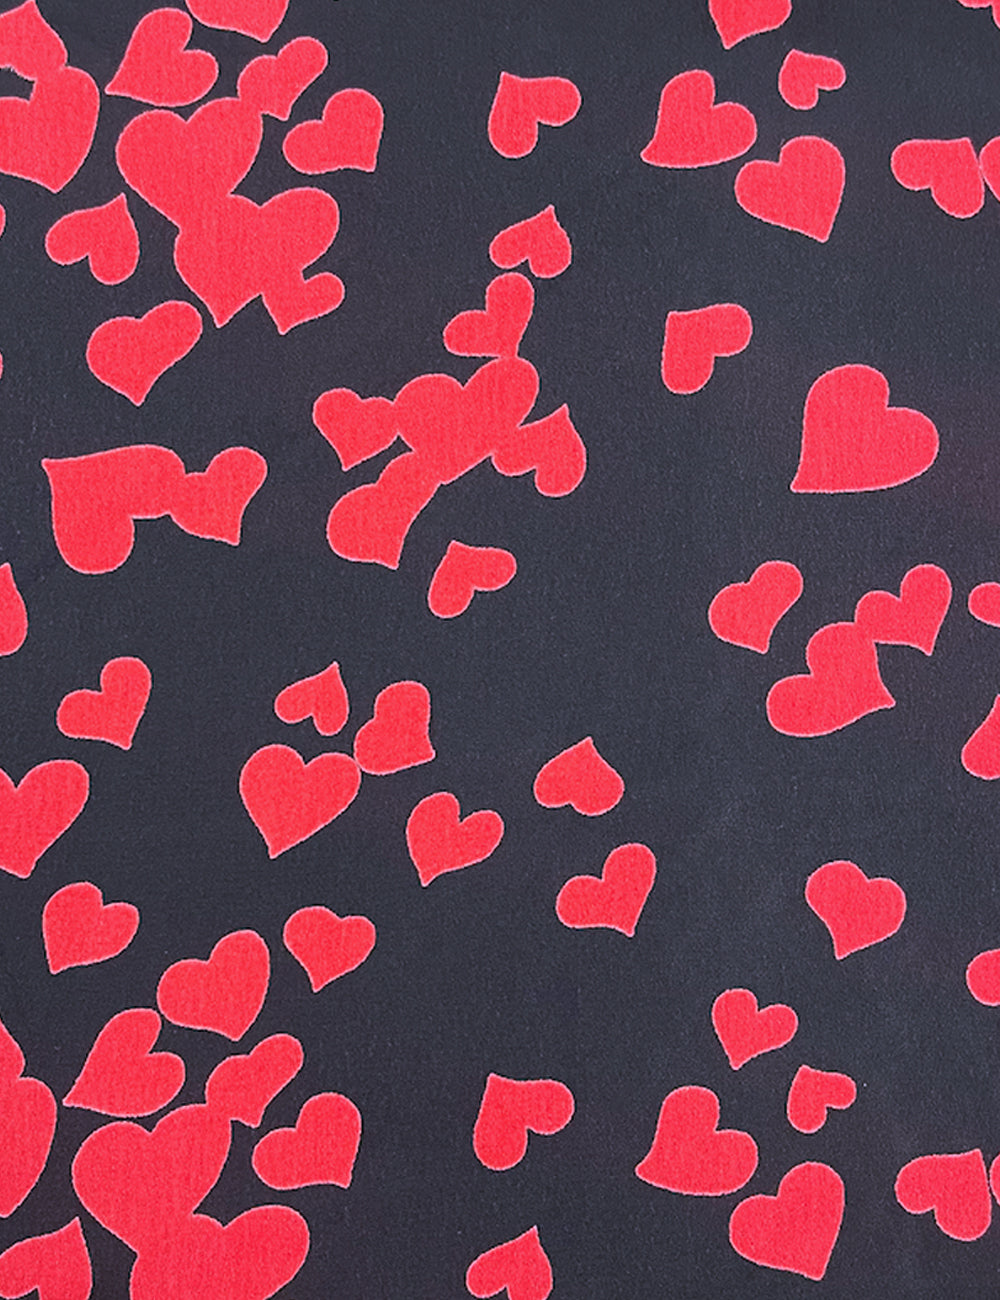 Black & Red Hearts Rayon Crepe Fabric - 1.5 yds - DAMAGE